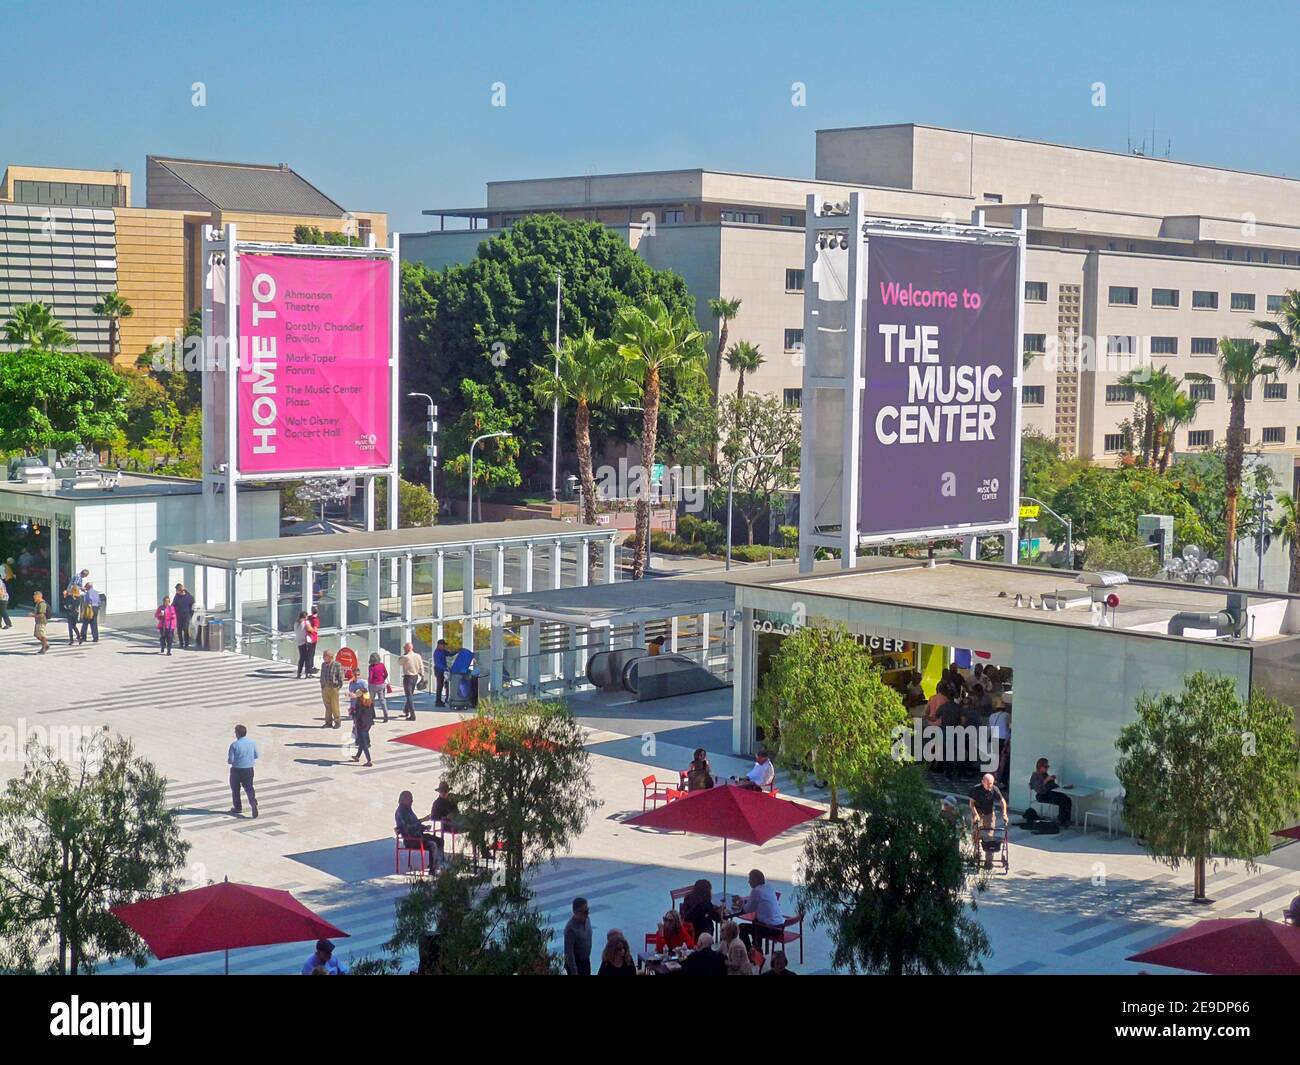 Los Angeles Music Center Plaza. The Music Center includes four performing arts houses, three of which are on the plaza and the fourth (Walt Disney Stock Photo